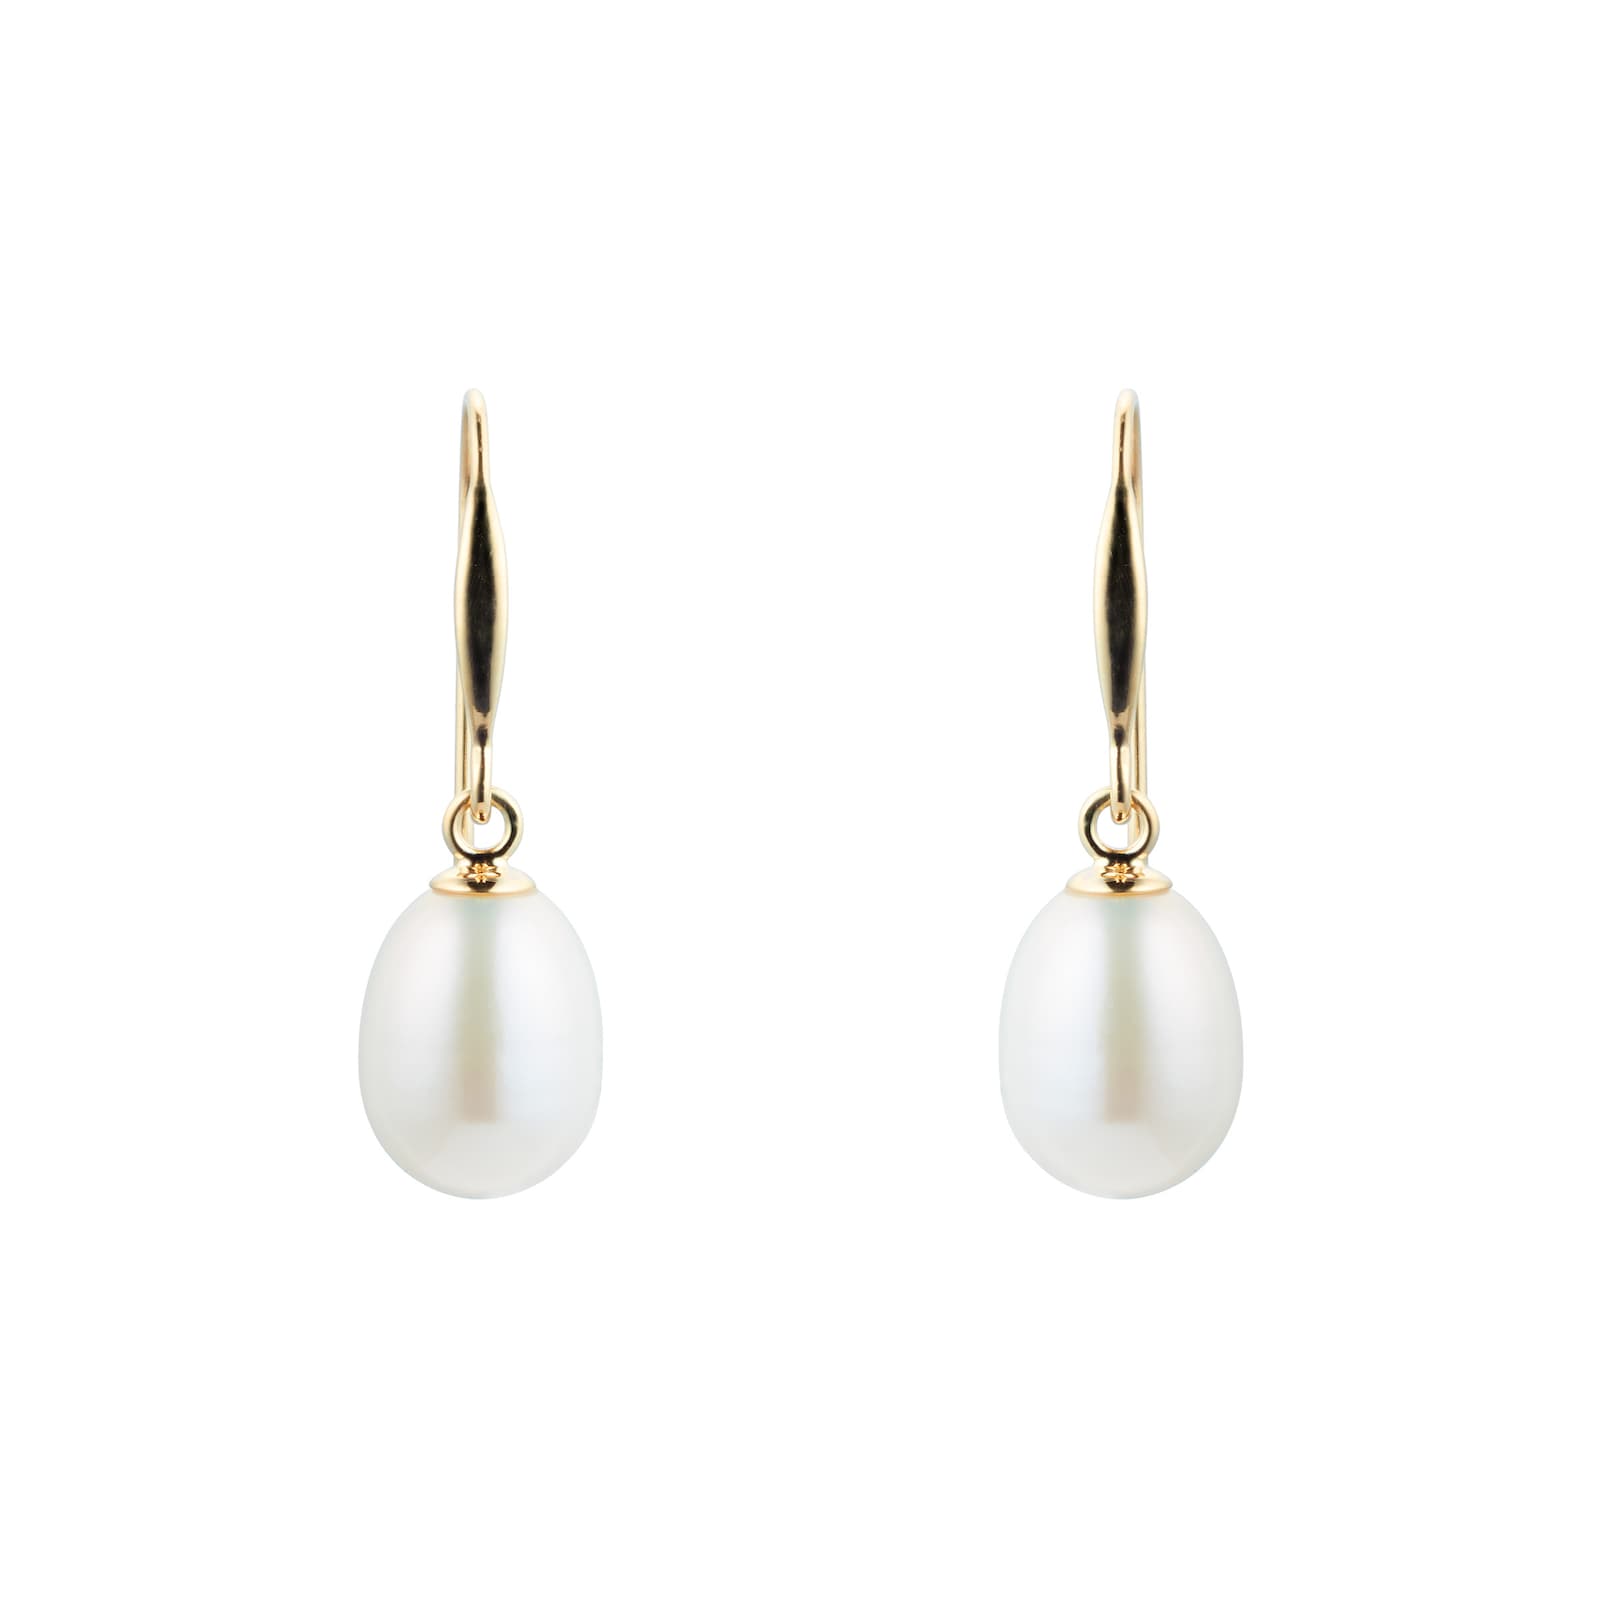 Goldsmiths 9ct Yellow Gold 7mm Freshwater Pearl Drop Earrings ...